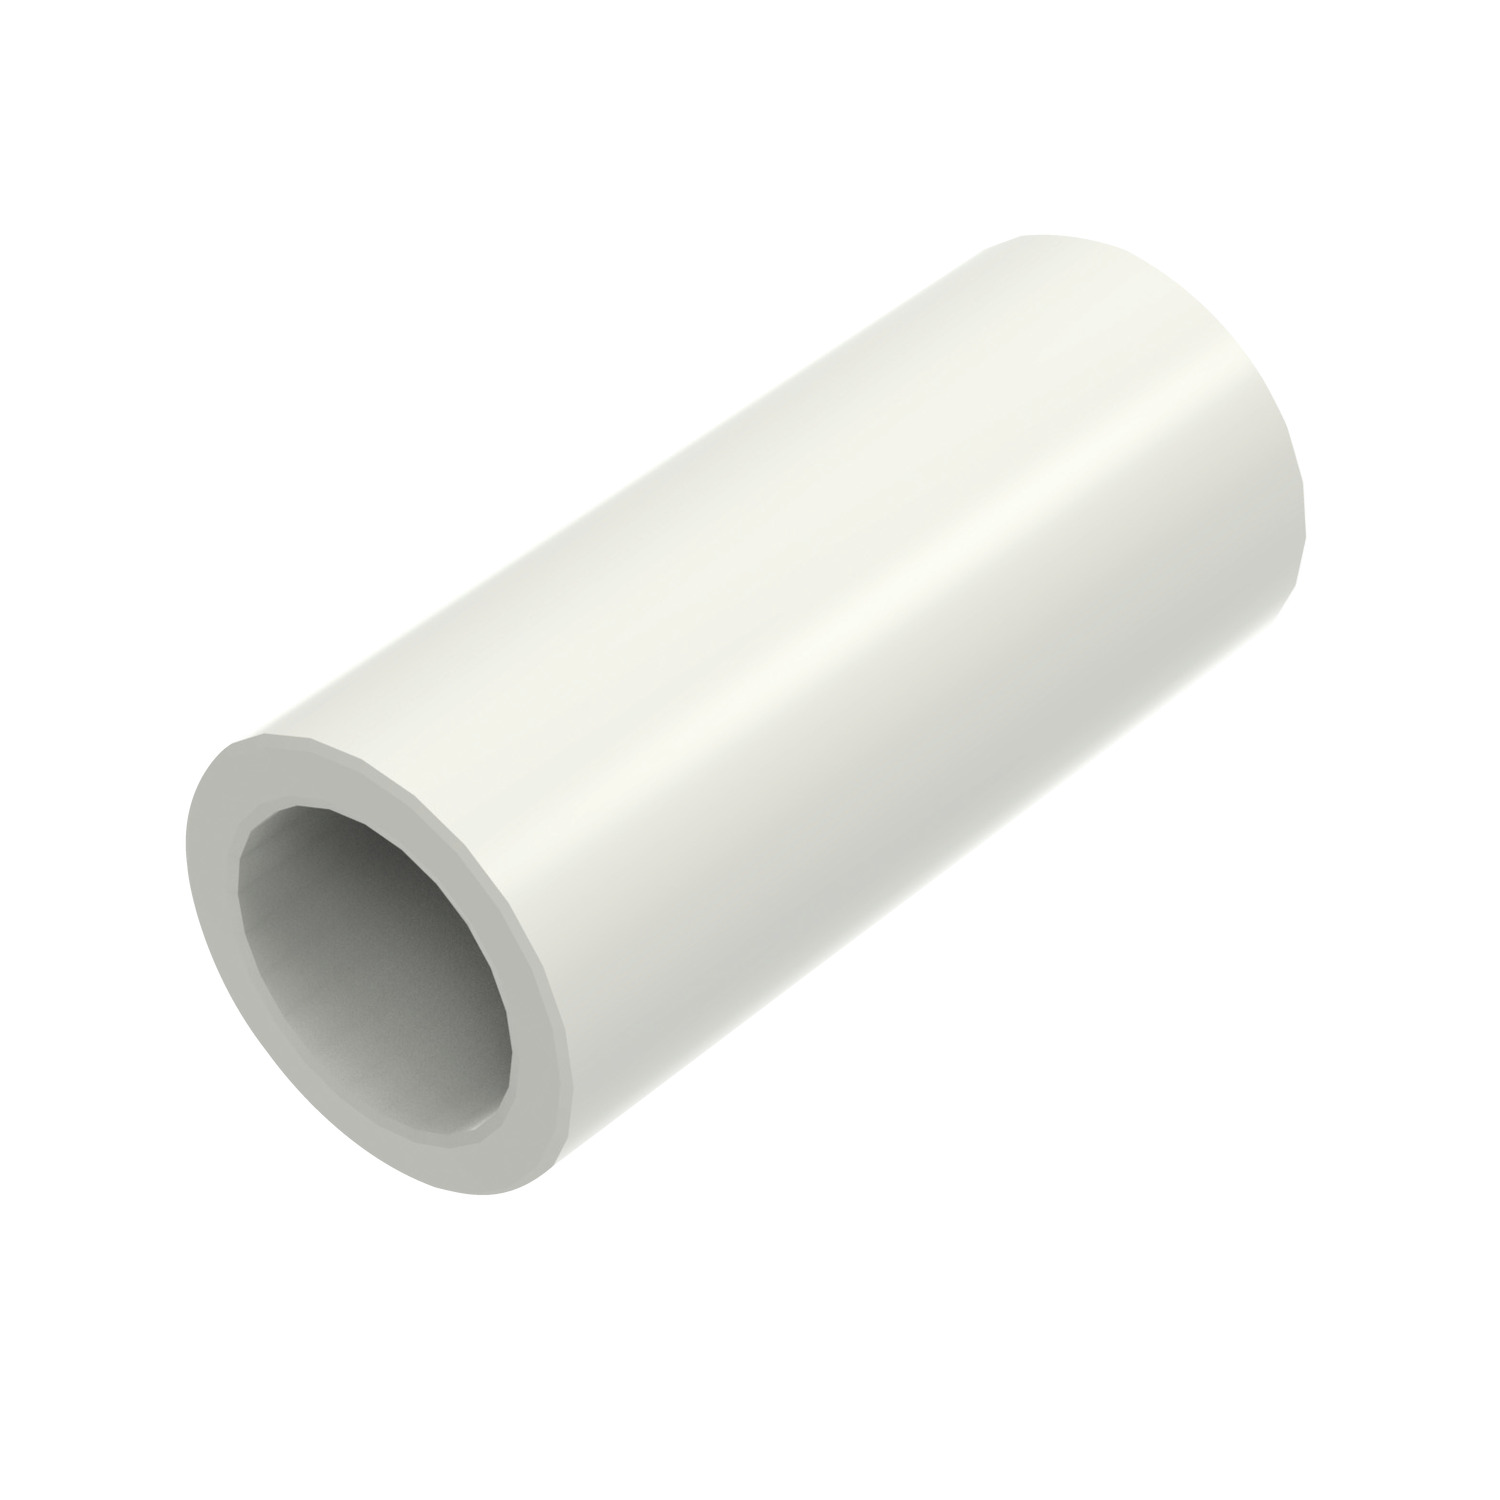 P1332 Cylindrical Spacers - Nylon